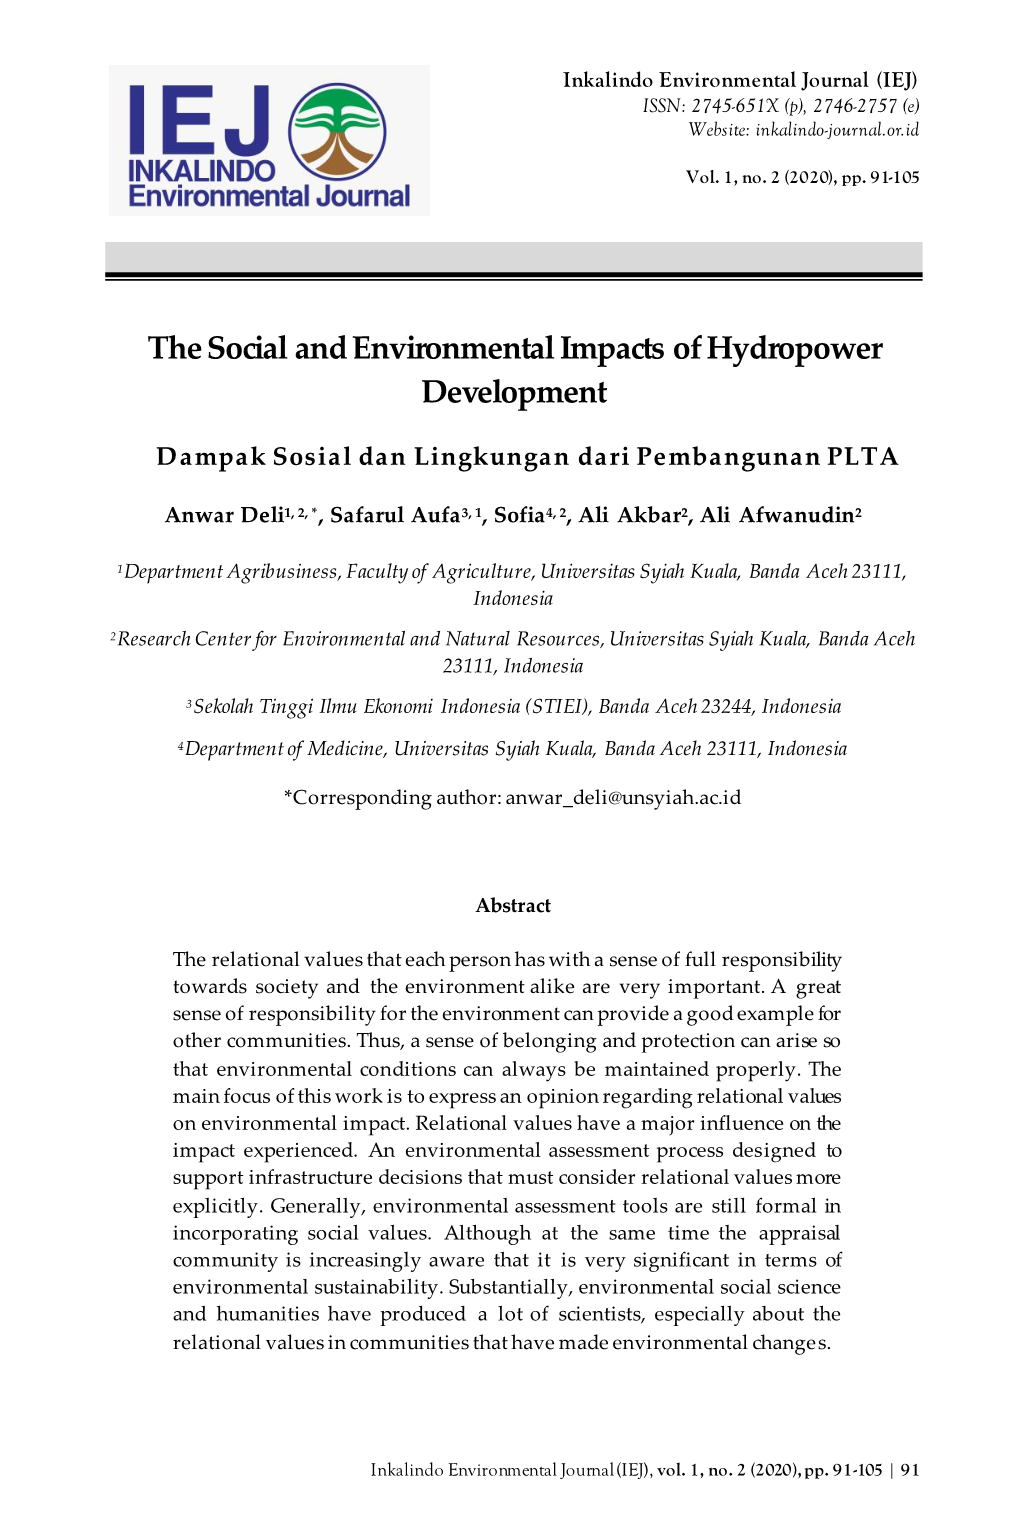 The Social and Environmental Impacts of Hydropower Development